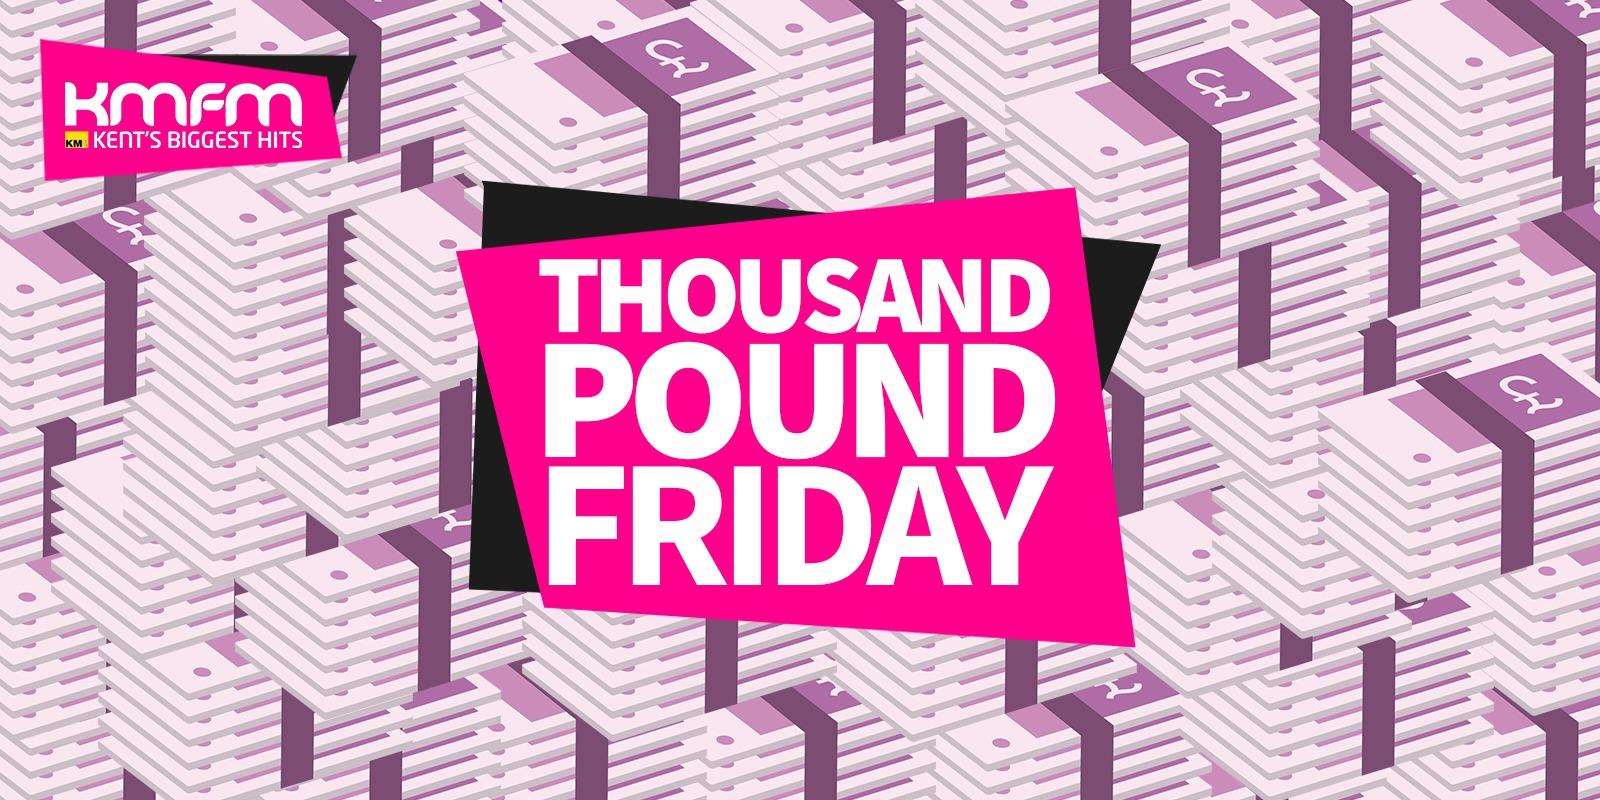 You could be £1,000 richer this weekend with Thousand Pound Friday on kmfm